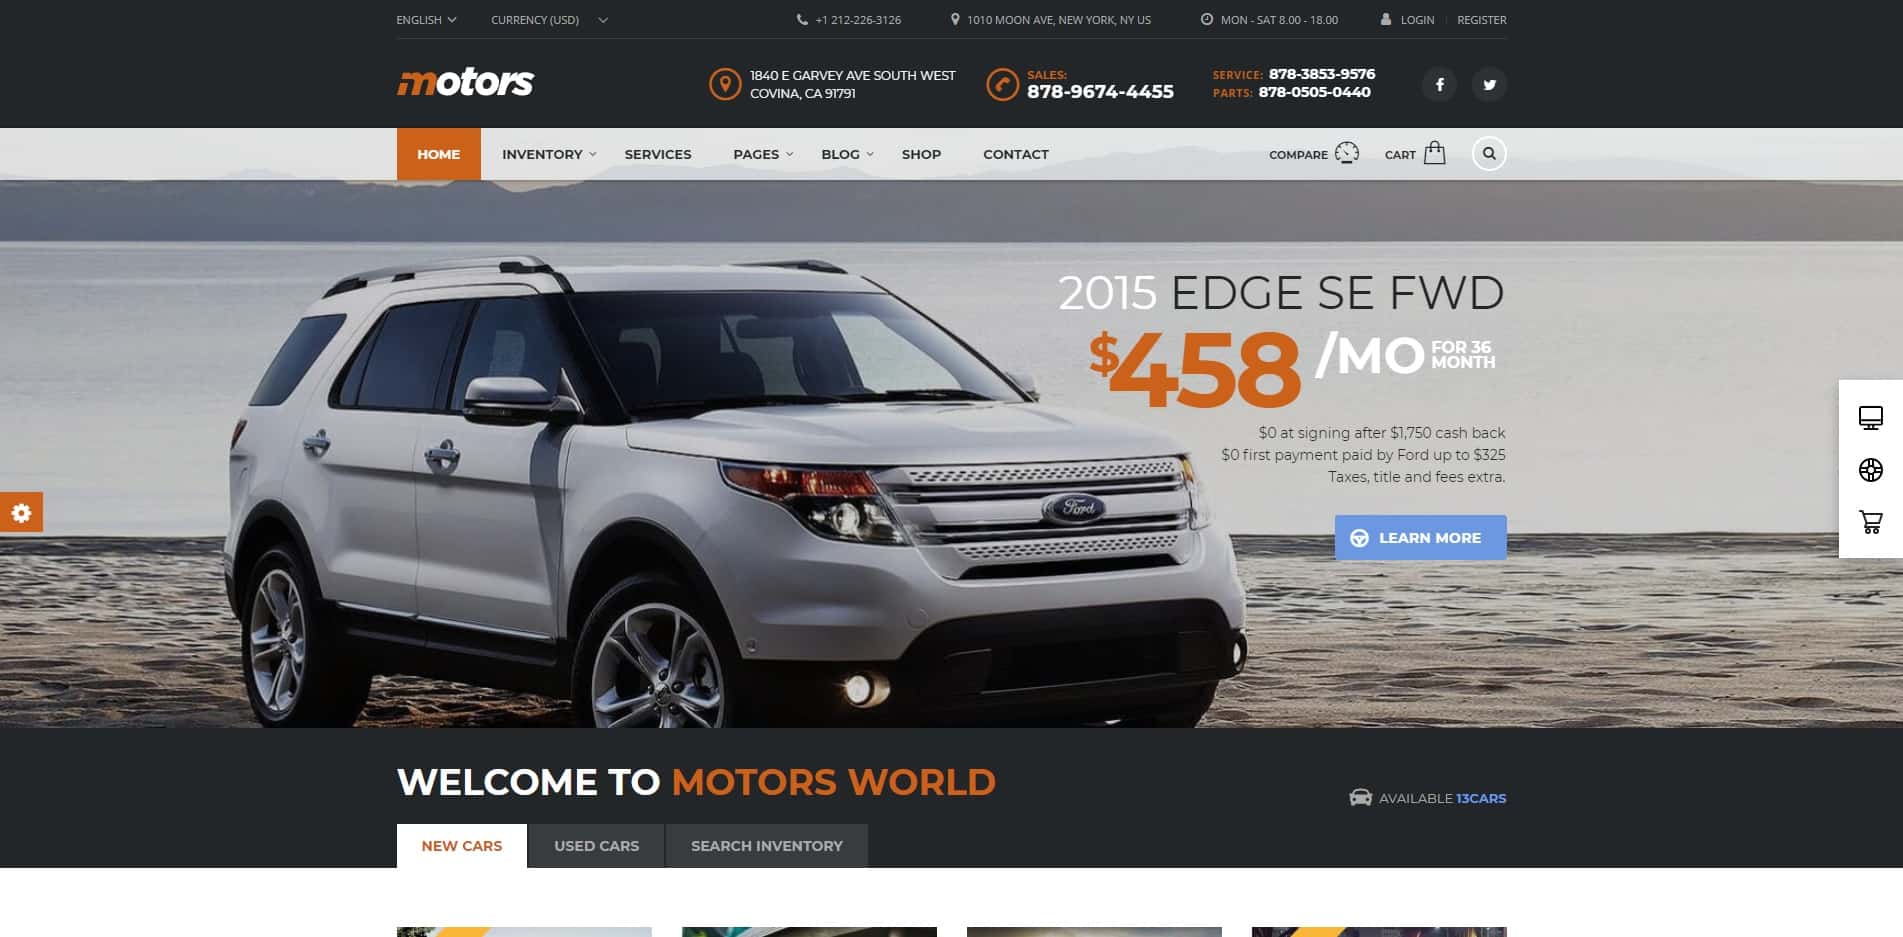 25 Car Dealer Website Templates and WordPress Themes For Car Dealers